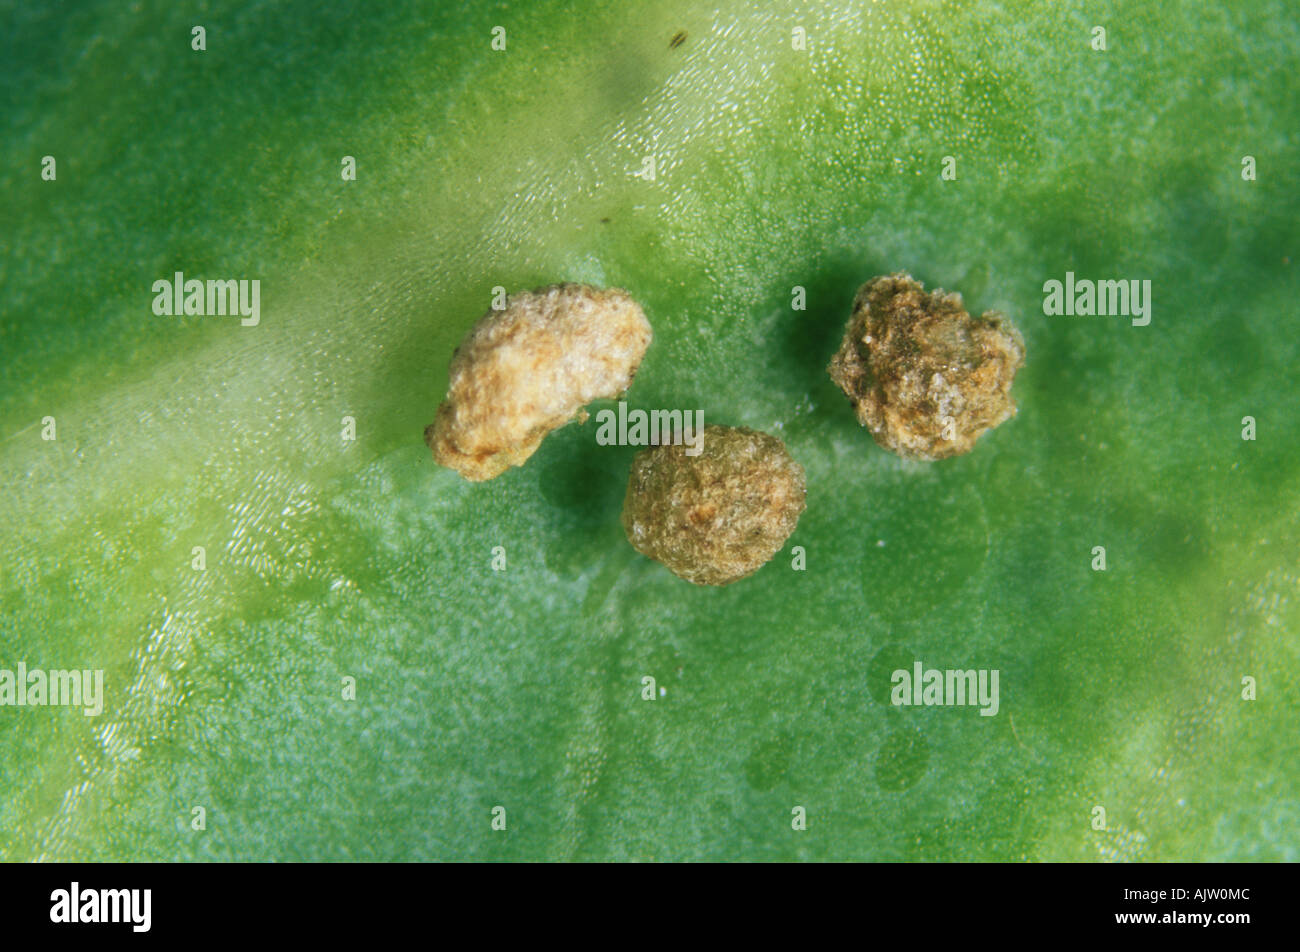 Three small wart like oedemas on a cabbage leaf surface Stock Photo